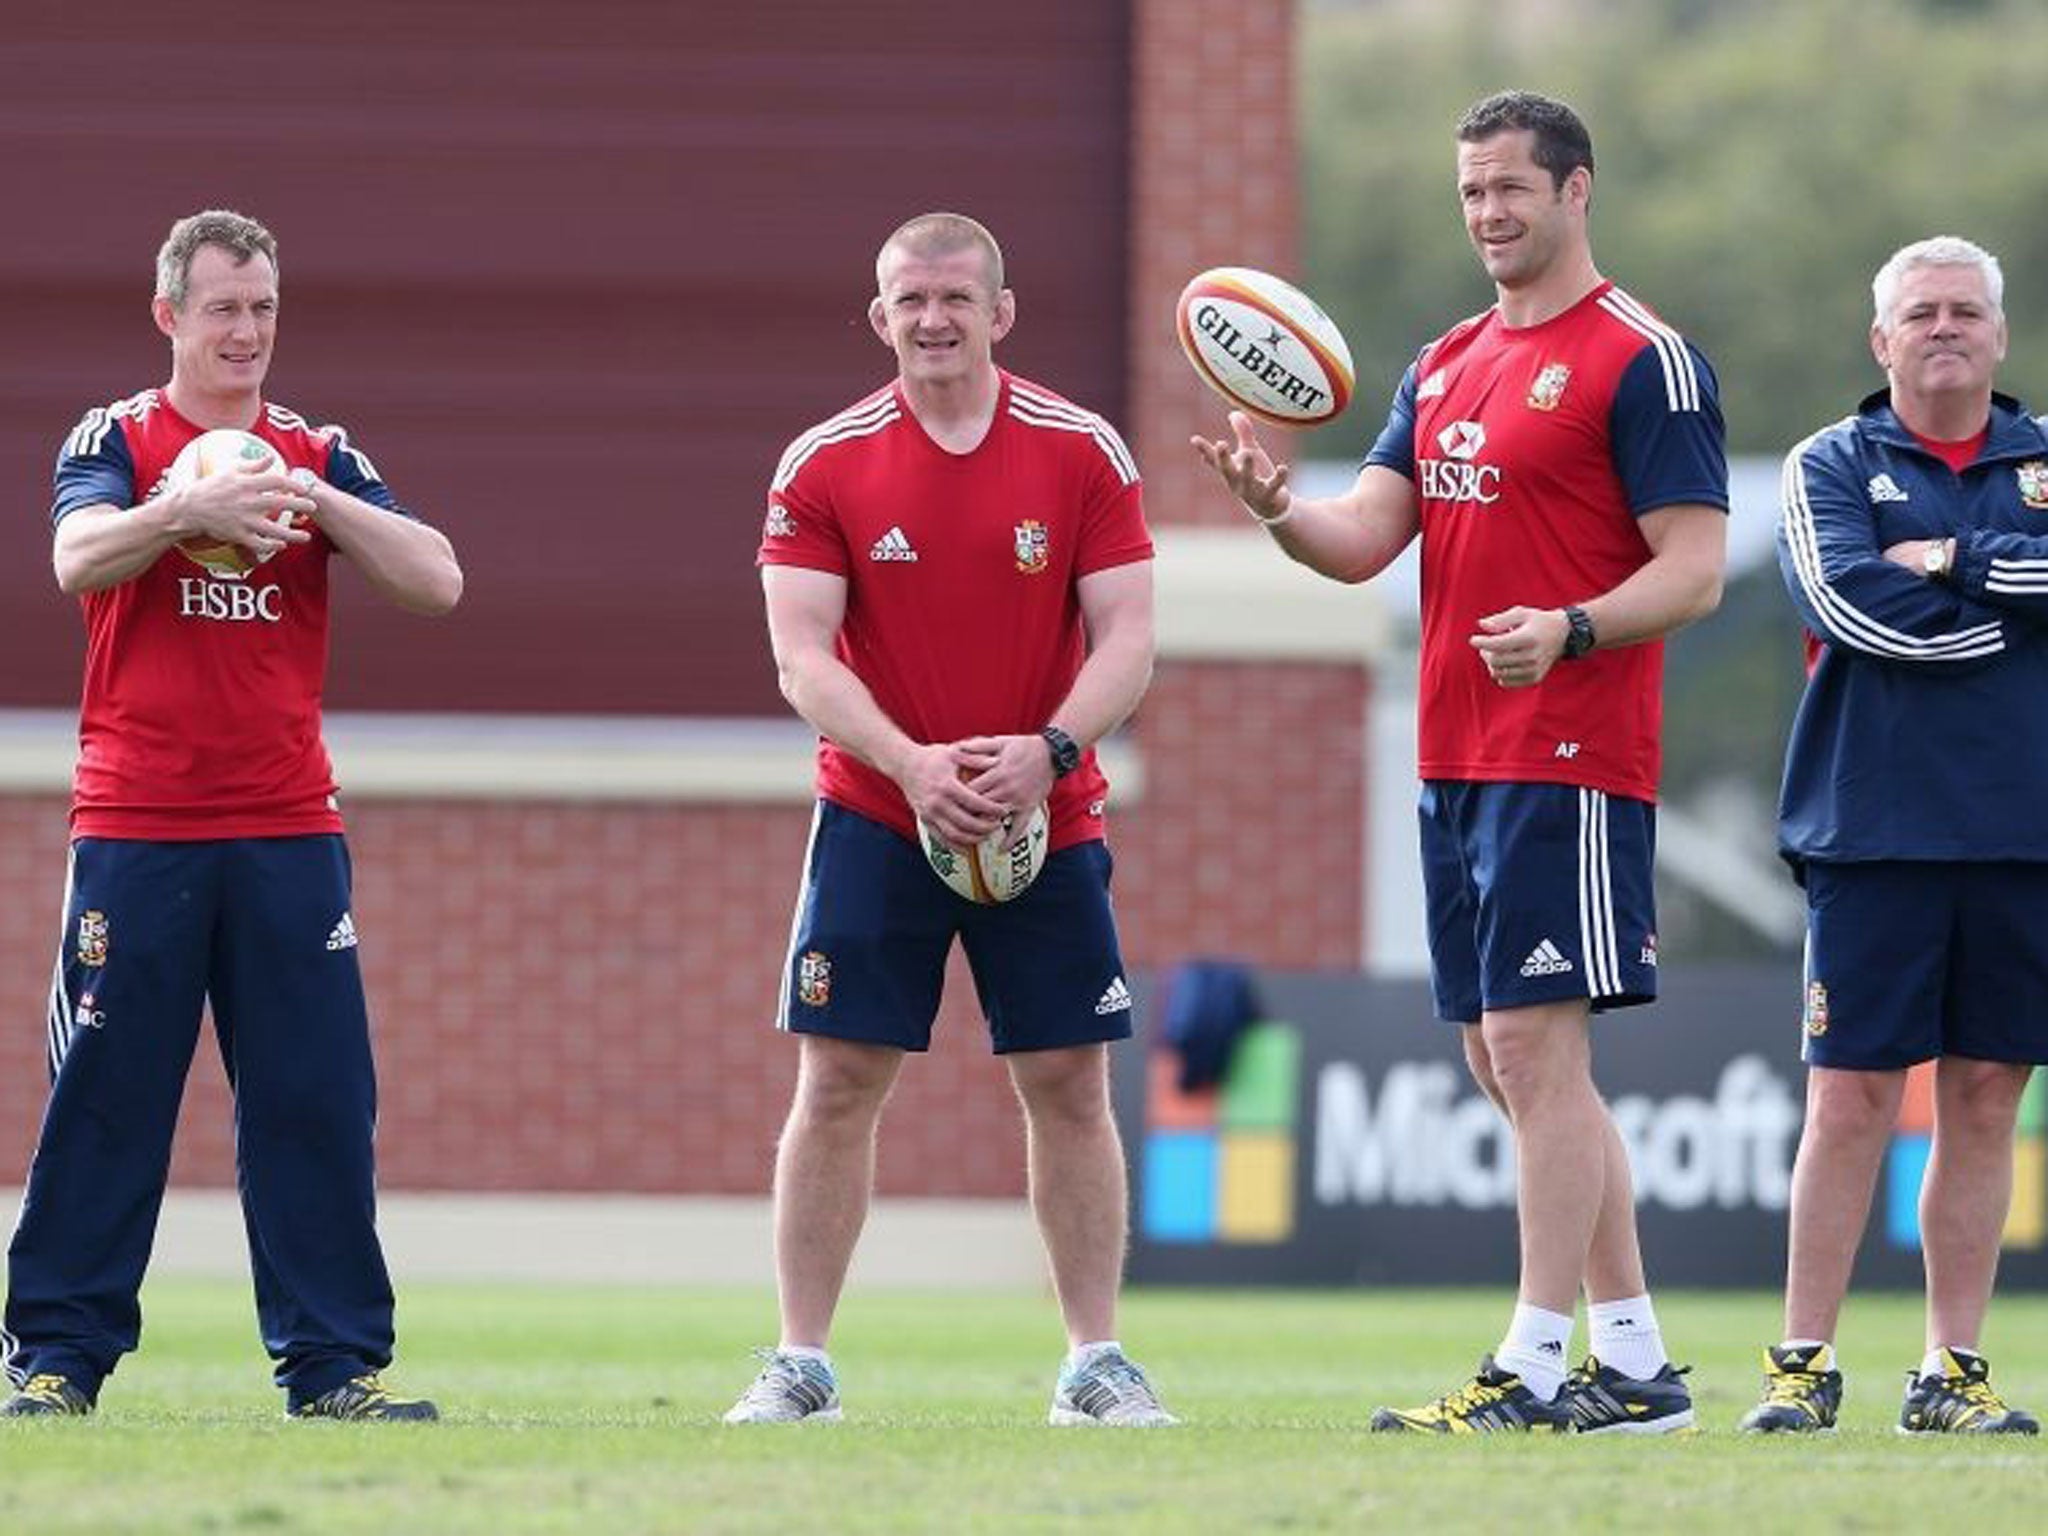 Rob Howley, backs coach, Graham Rowntree, forwards coach, Andy Farrell, defence coach and head coach Warren Gatland look on during the British and Irish Lions captain's run in Australia (Getty Images)